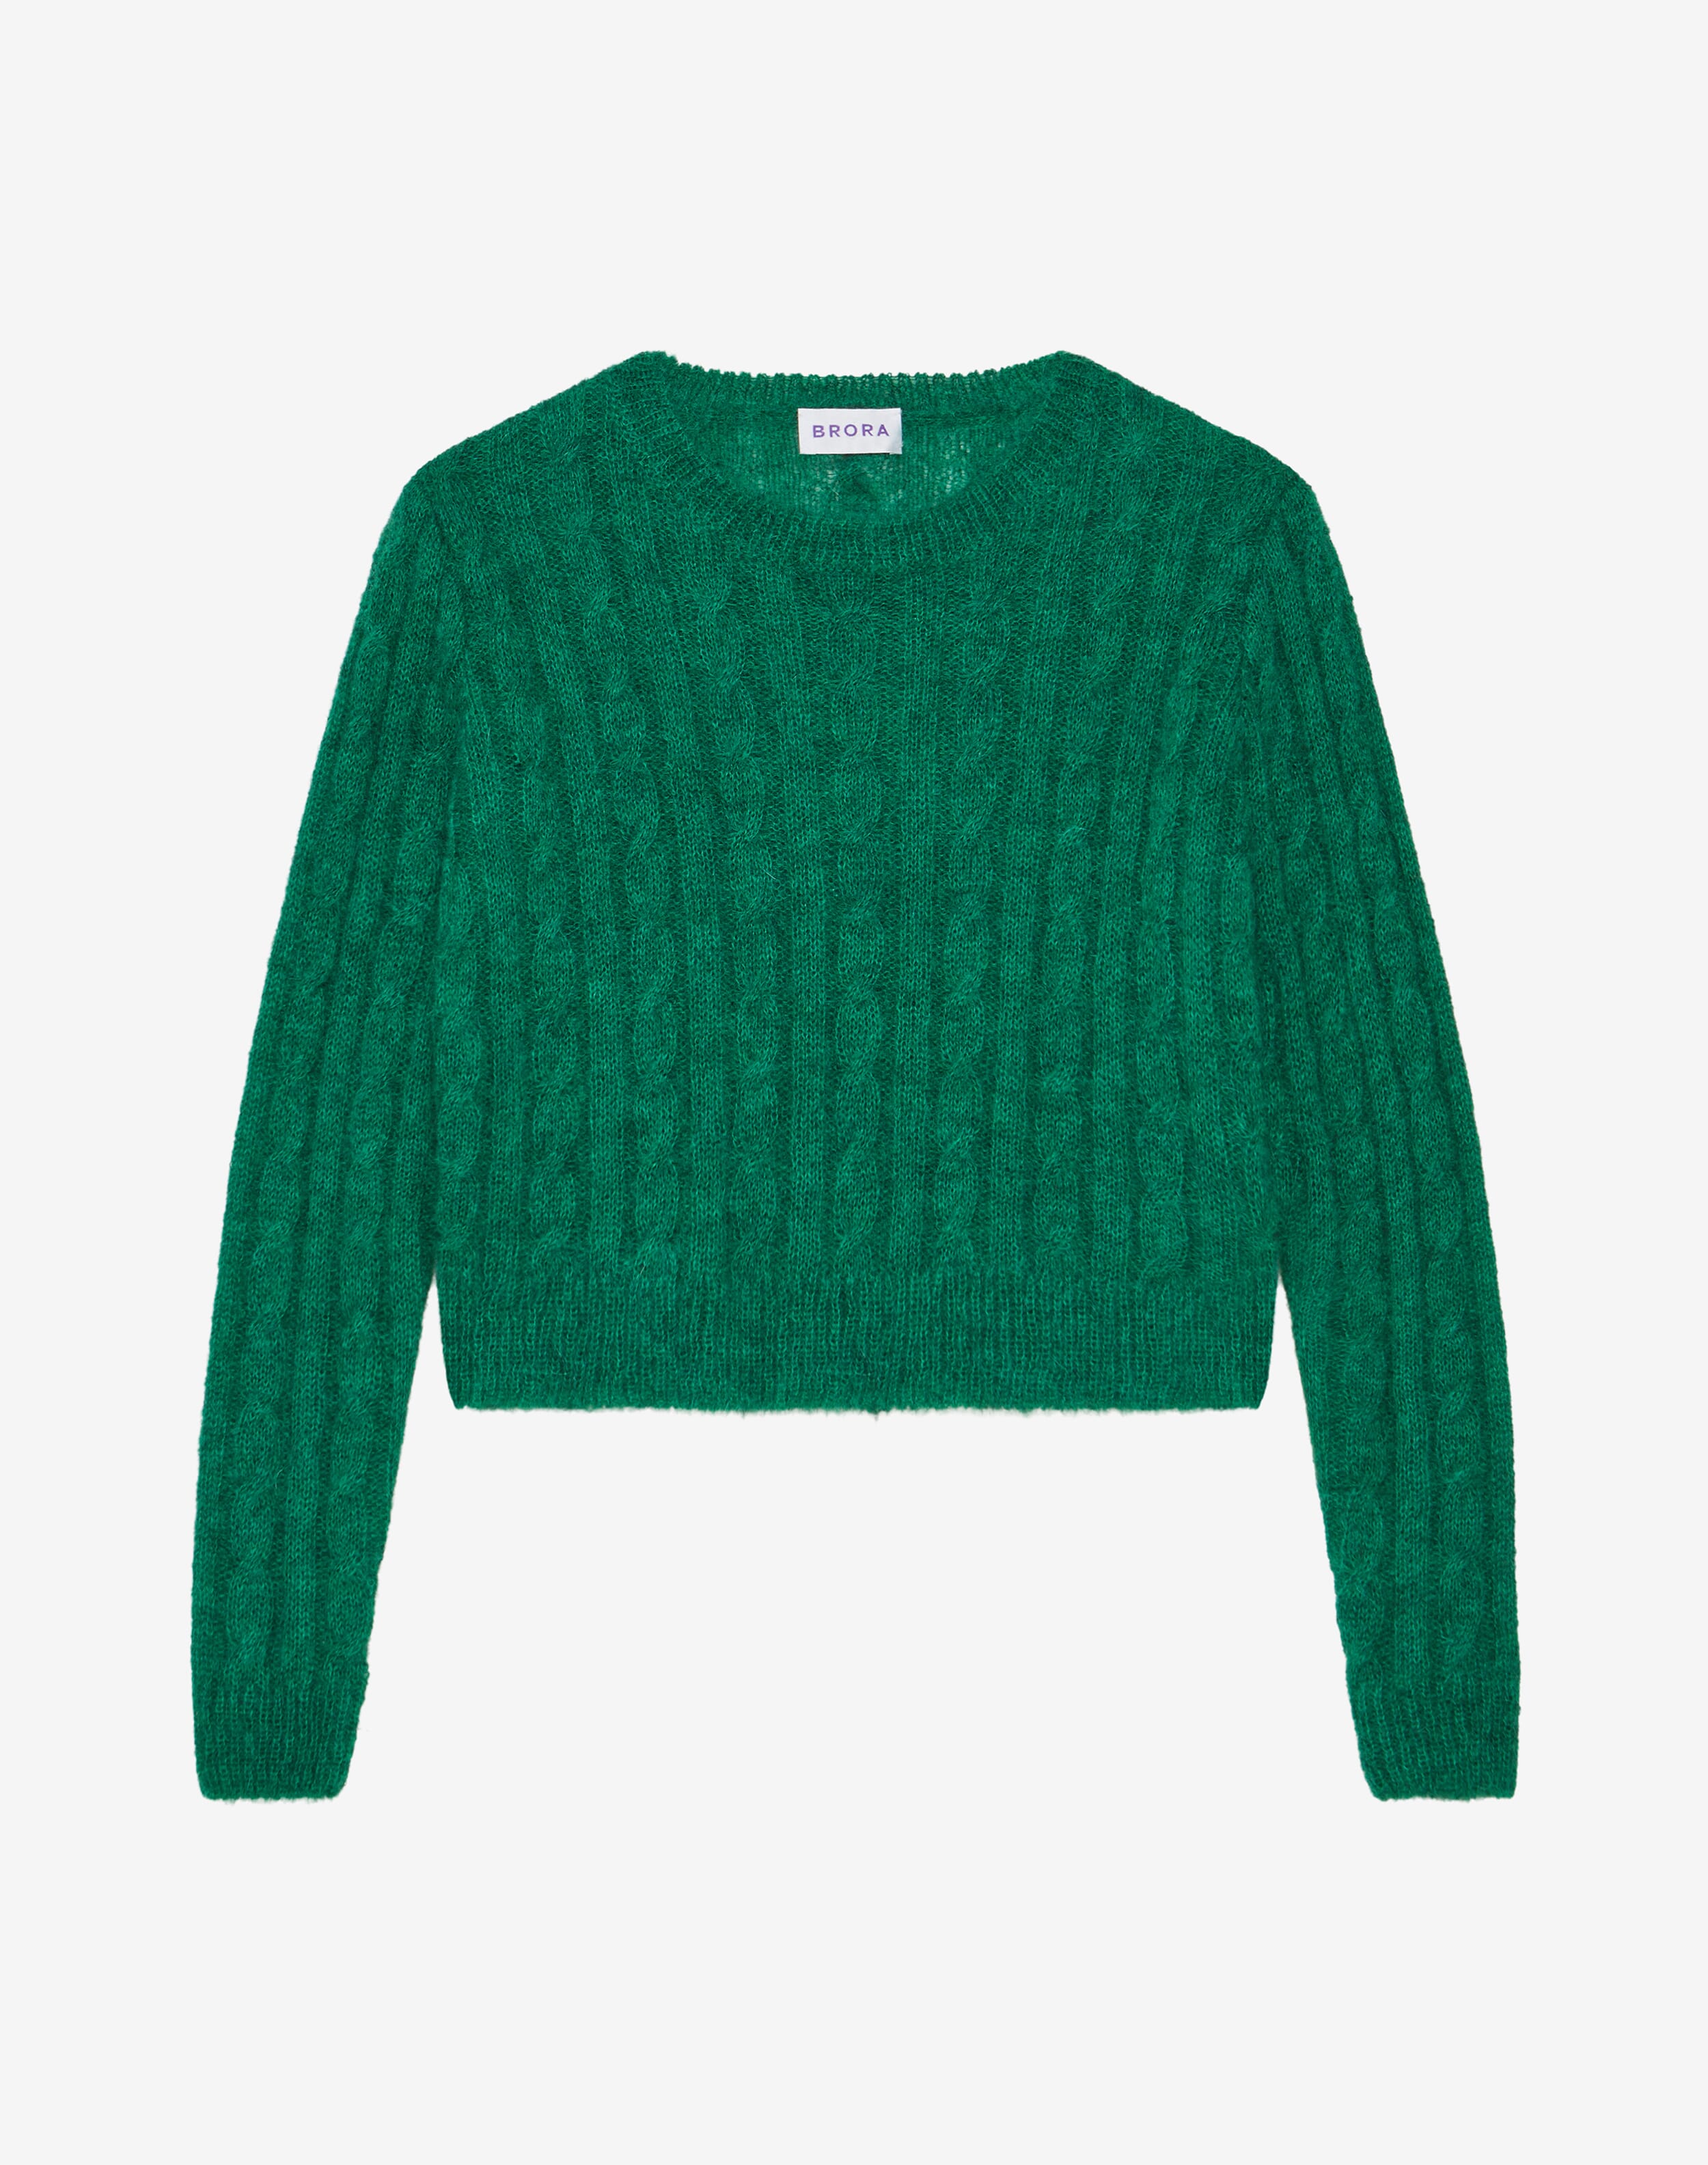 Green Cable knit sweater T1028 – Tiffy mohair